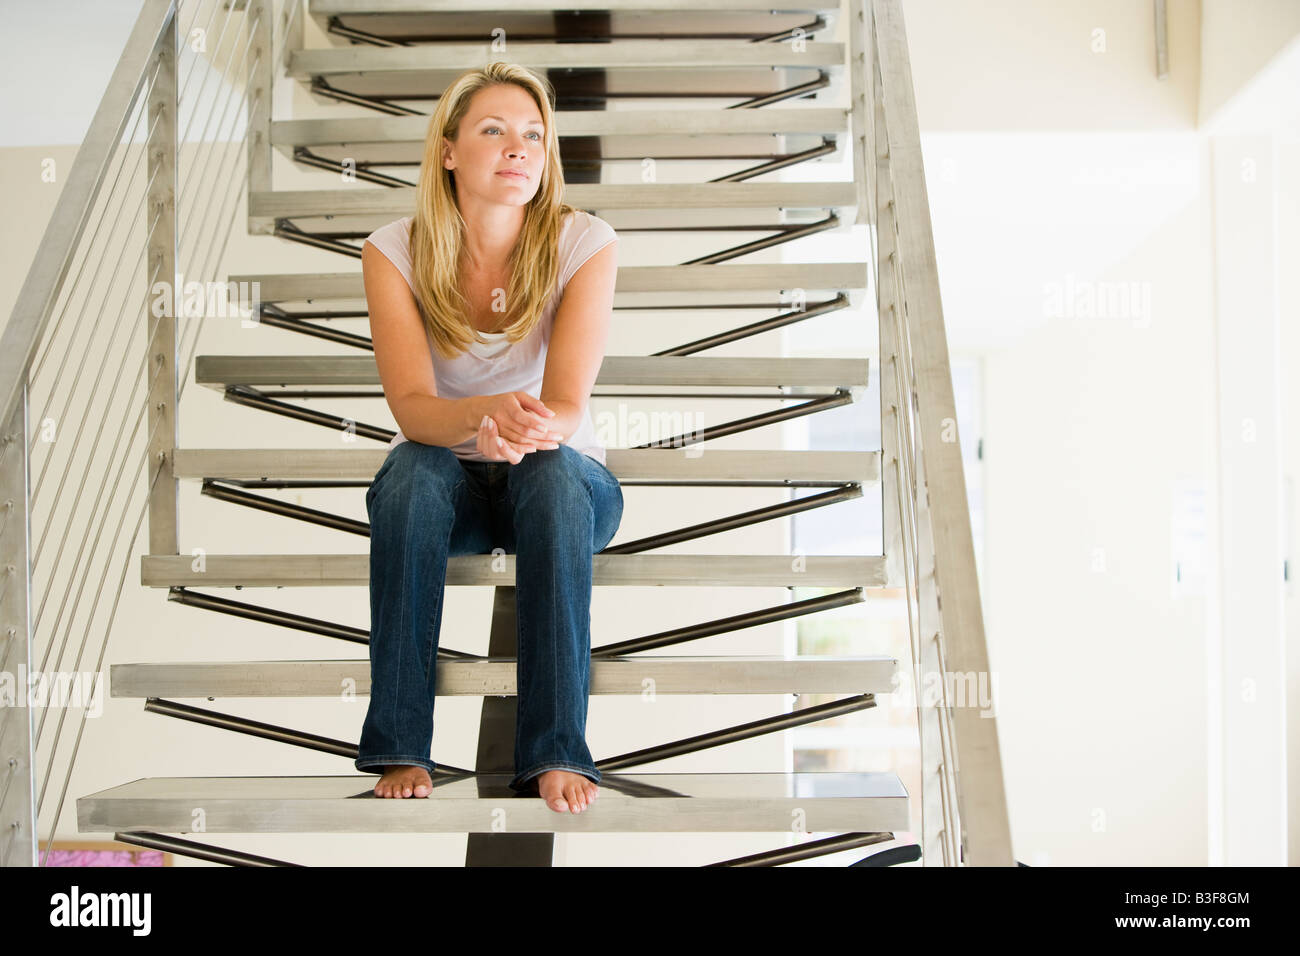 Woman sitting on stairs Banque D'Images